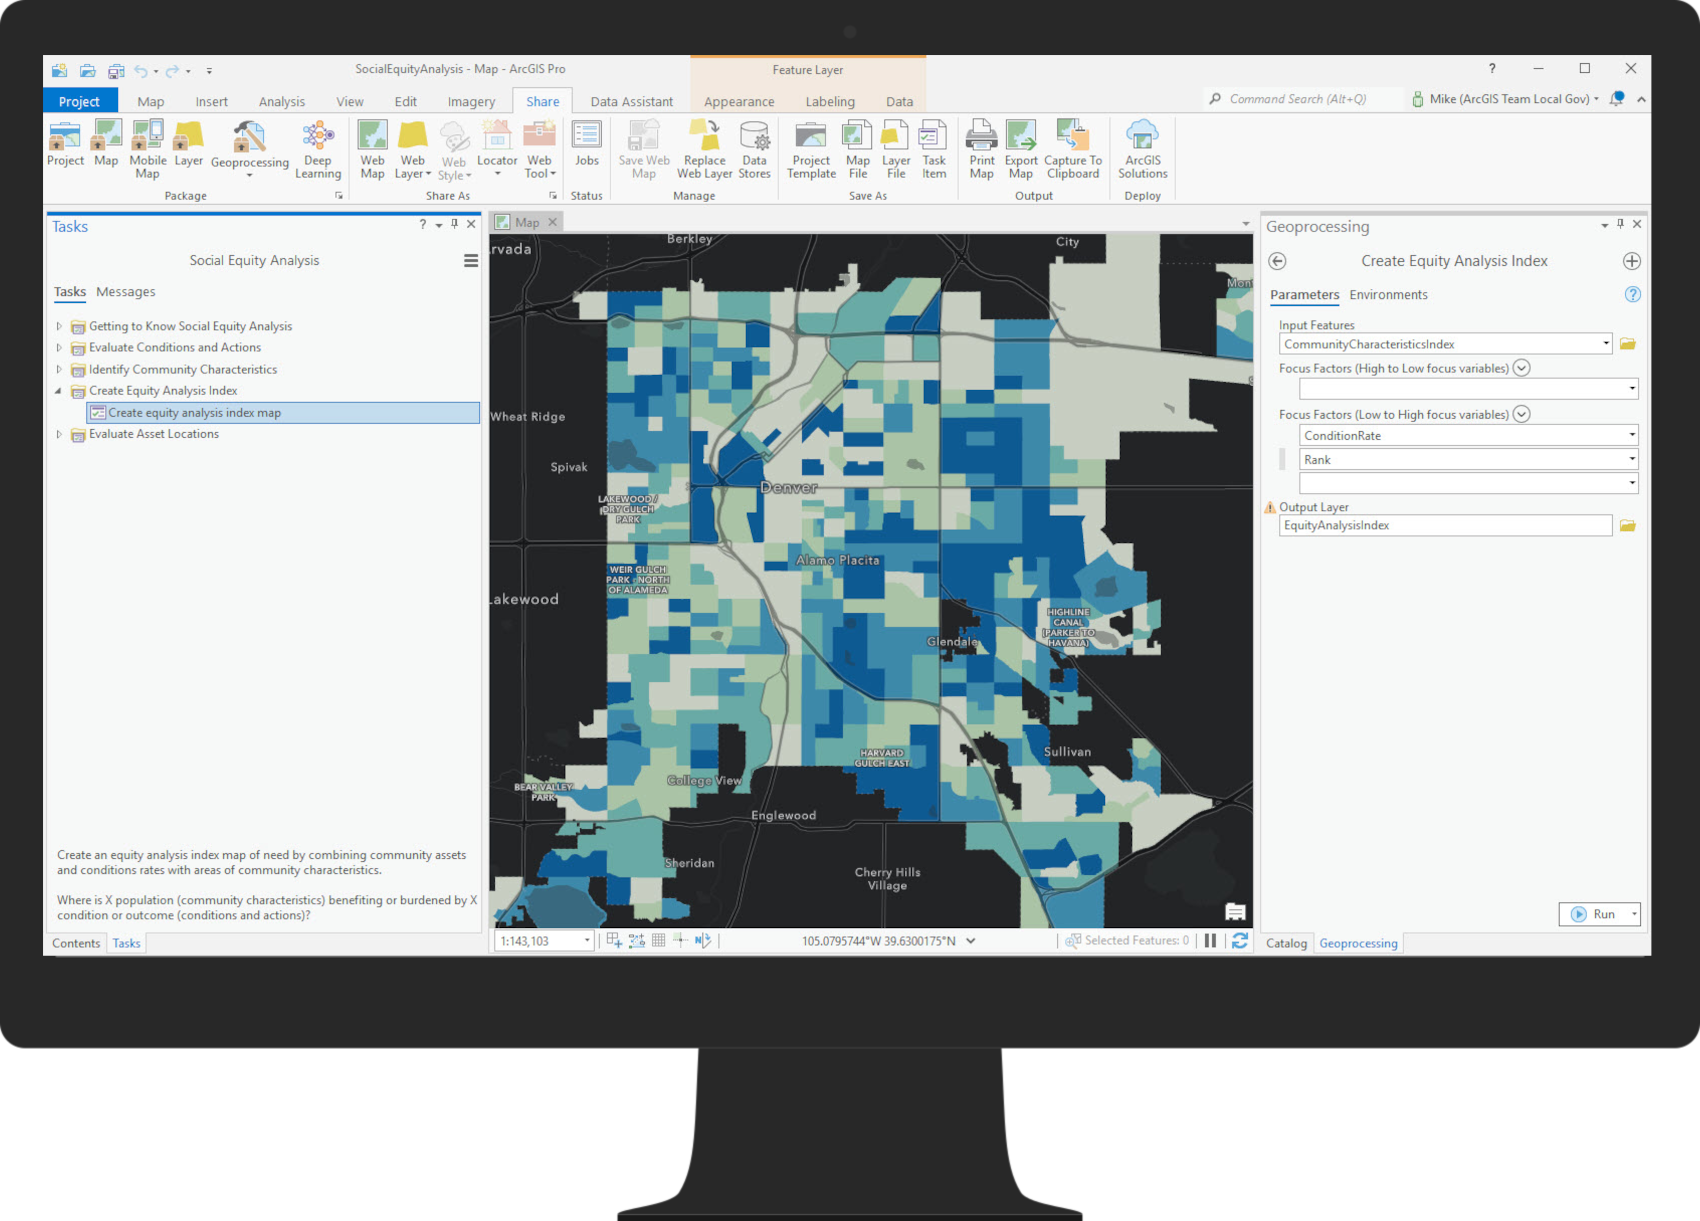 Equity Analysis Index map in ArcGIS Pro